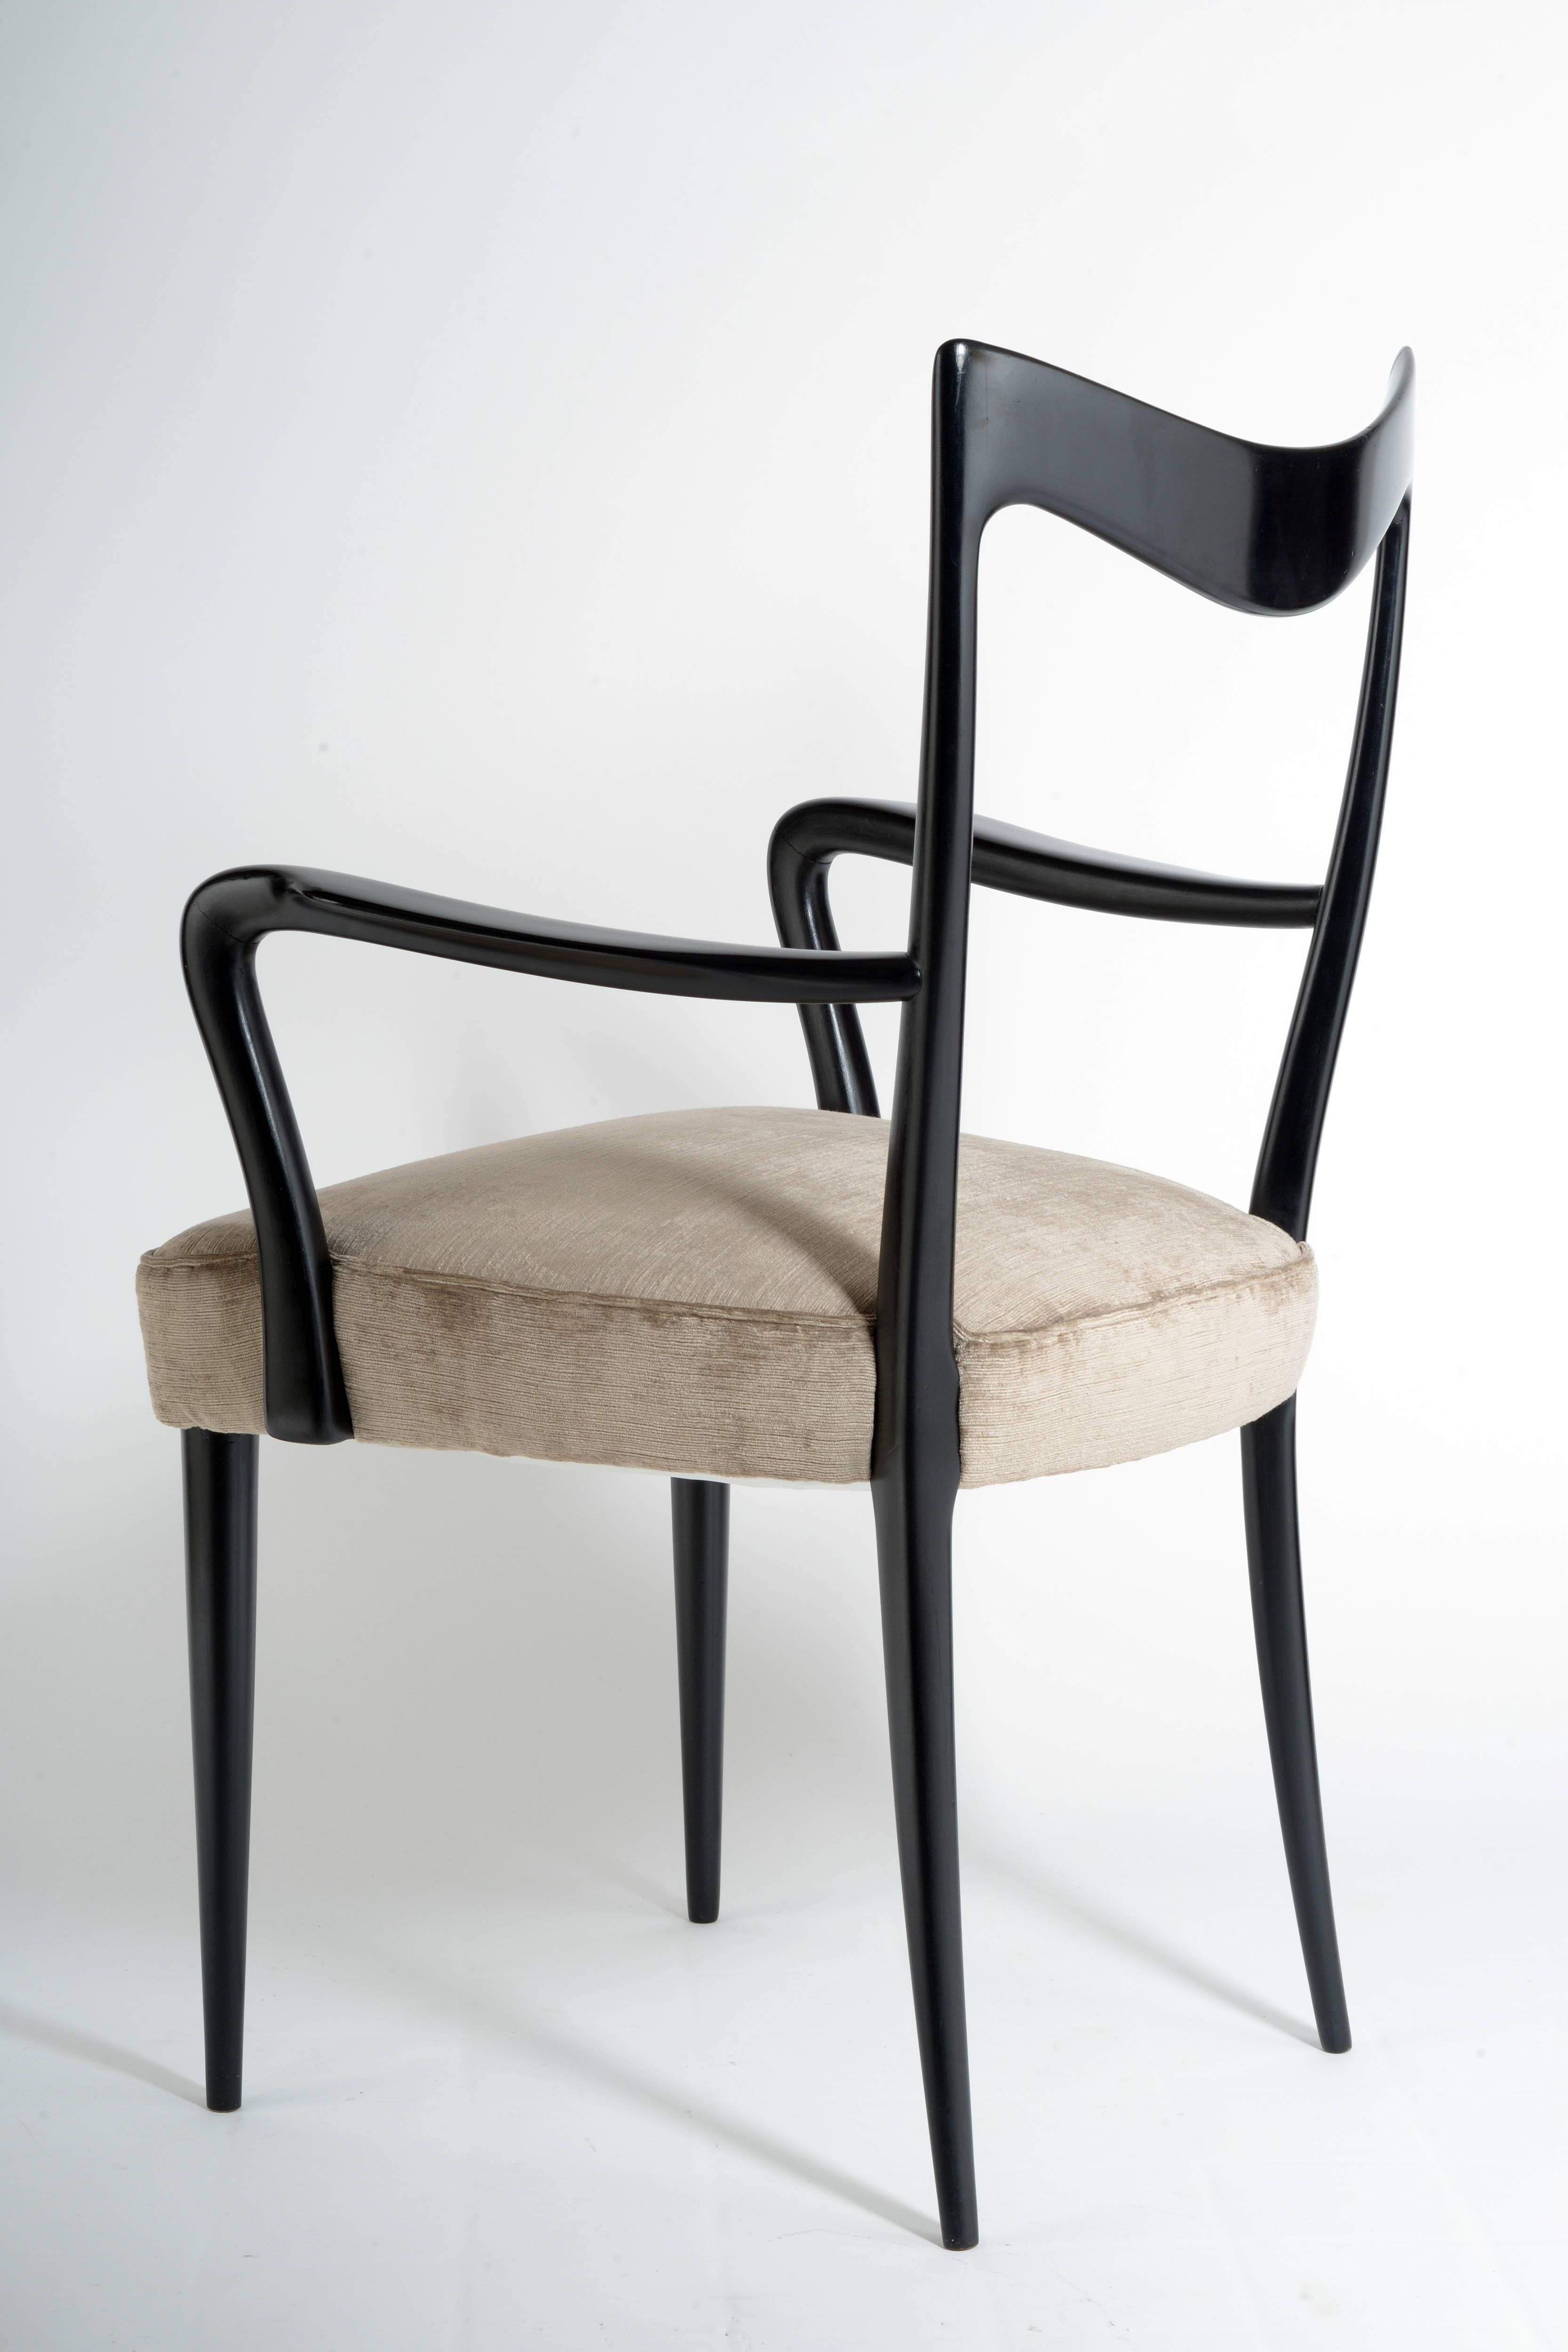 Mid-20th Century Italian 1950s Black Lacquered Solid Wood Chairs with Arms by Cesare Lacca